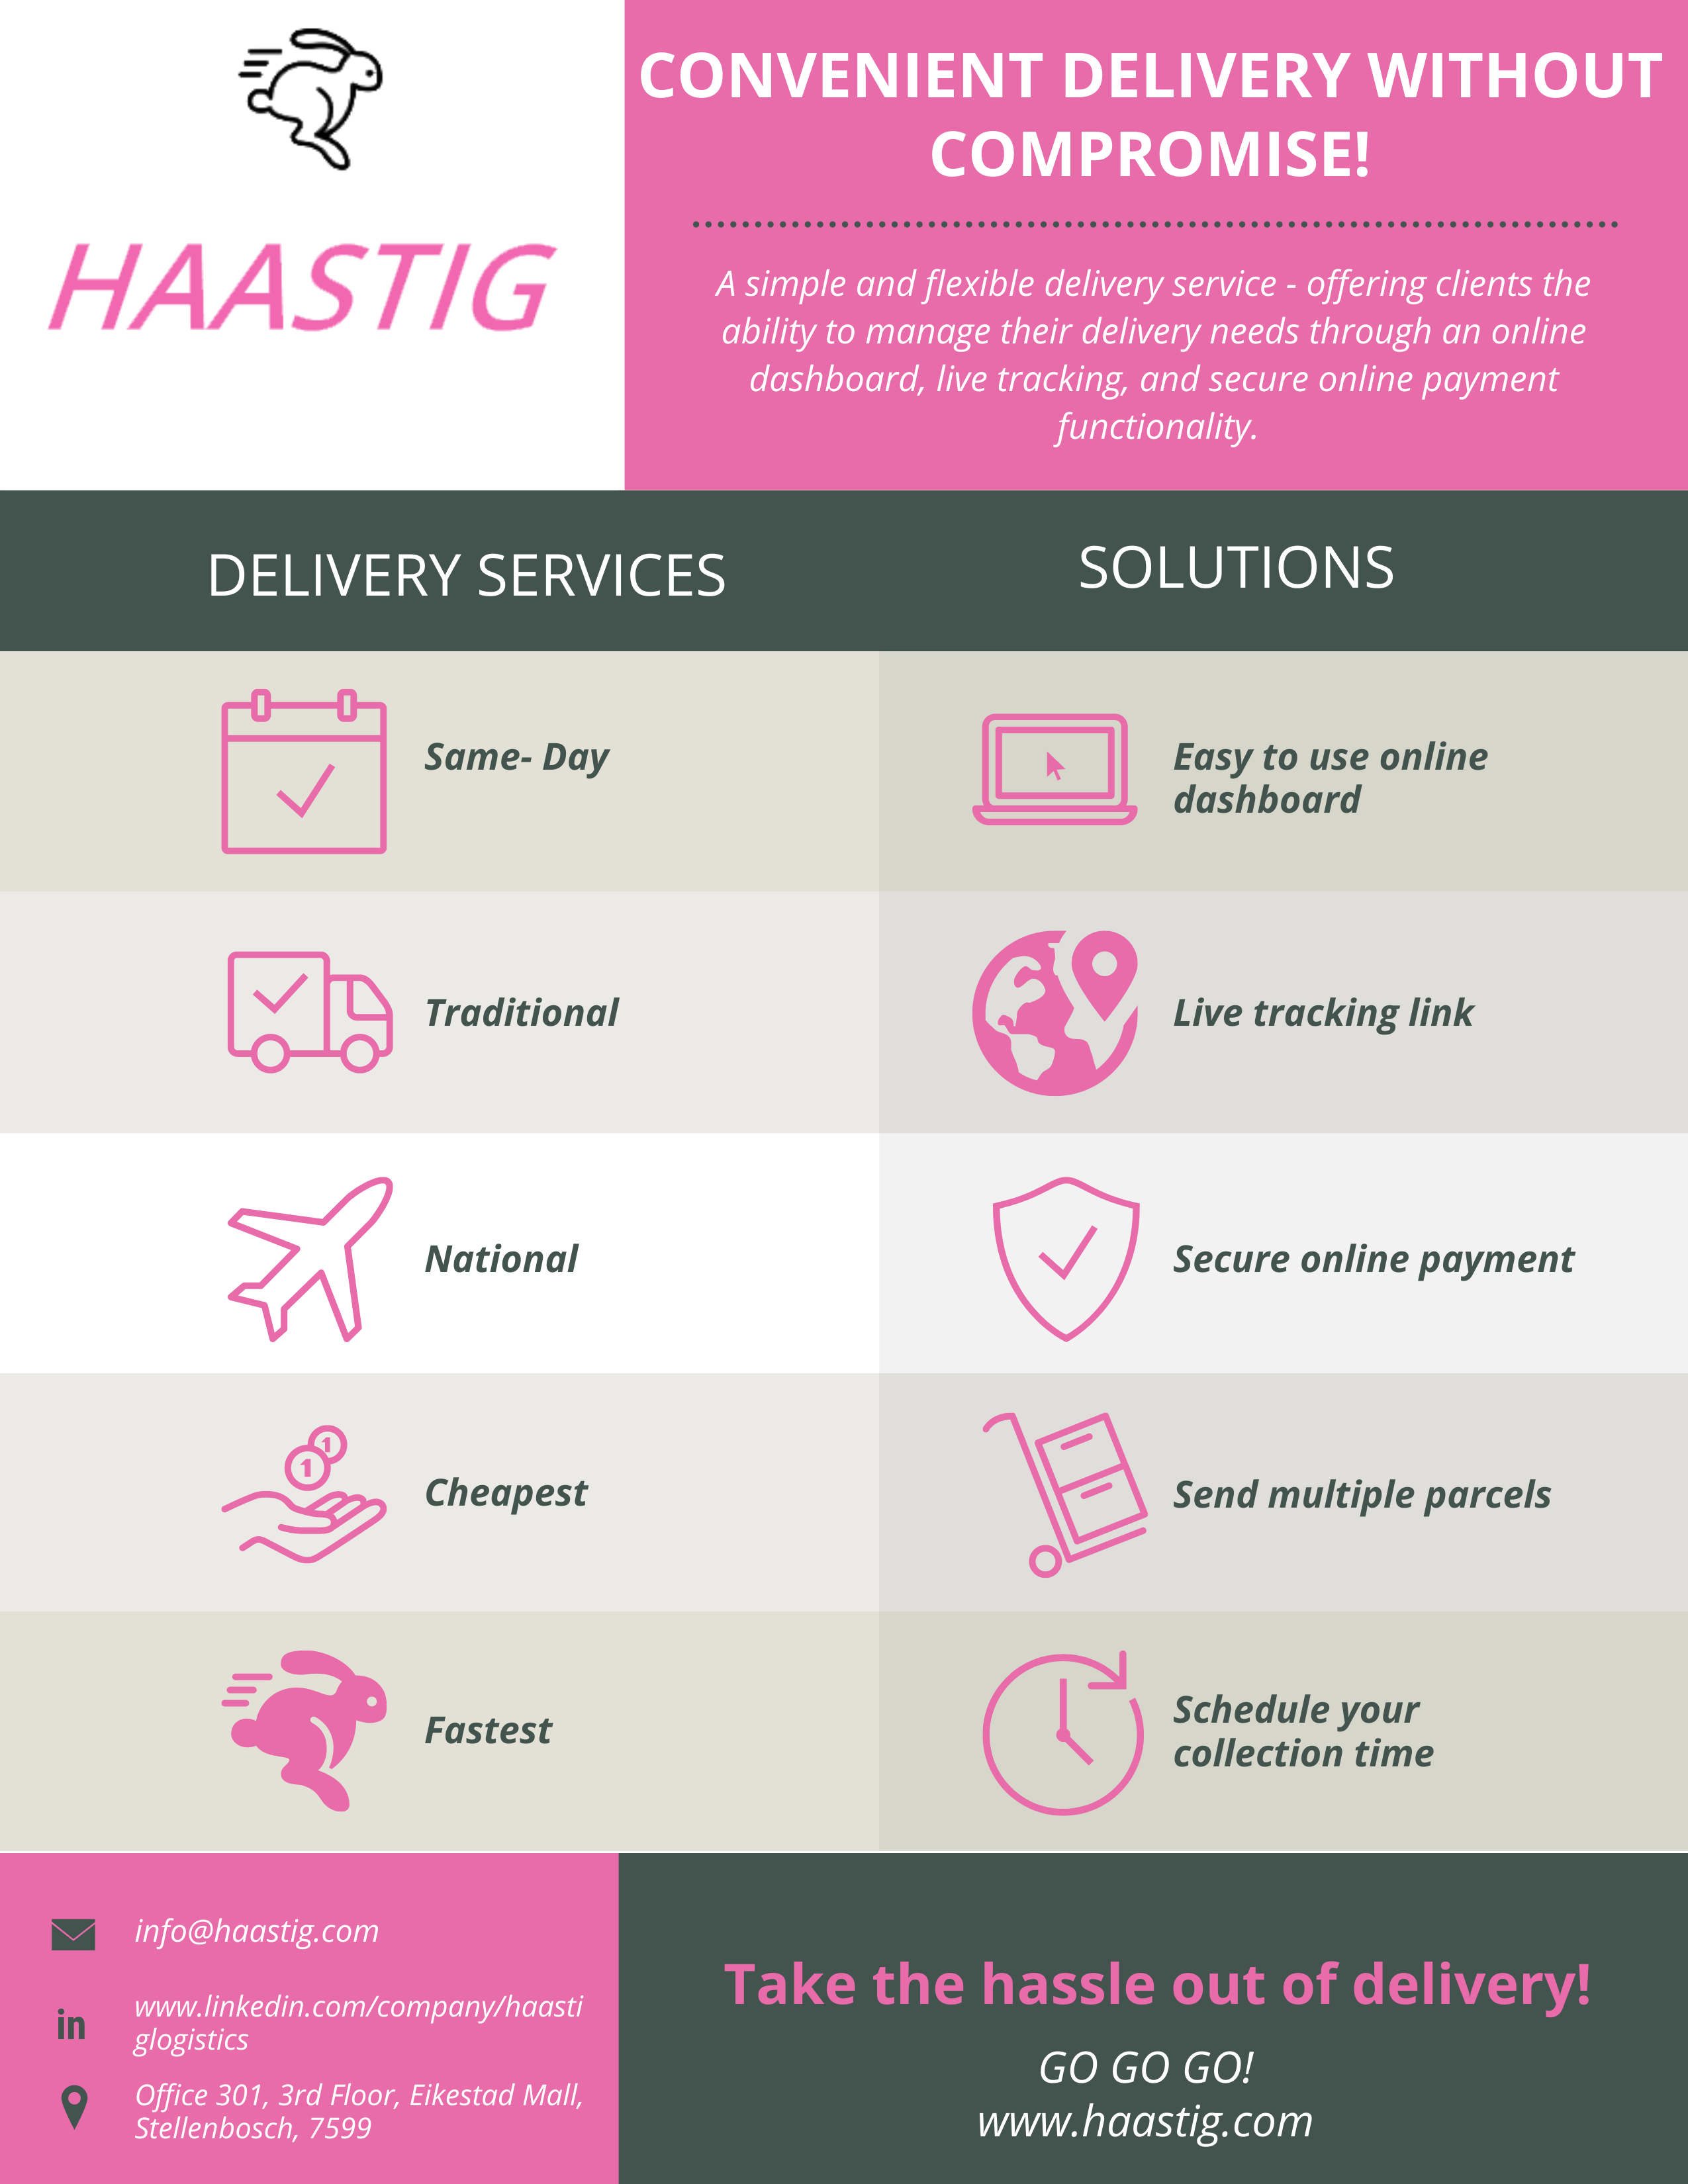 Haastig Delivery Services & Solutions